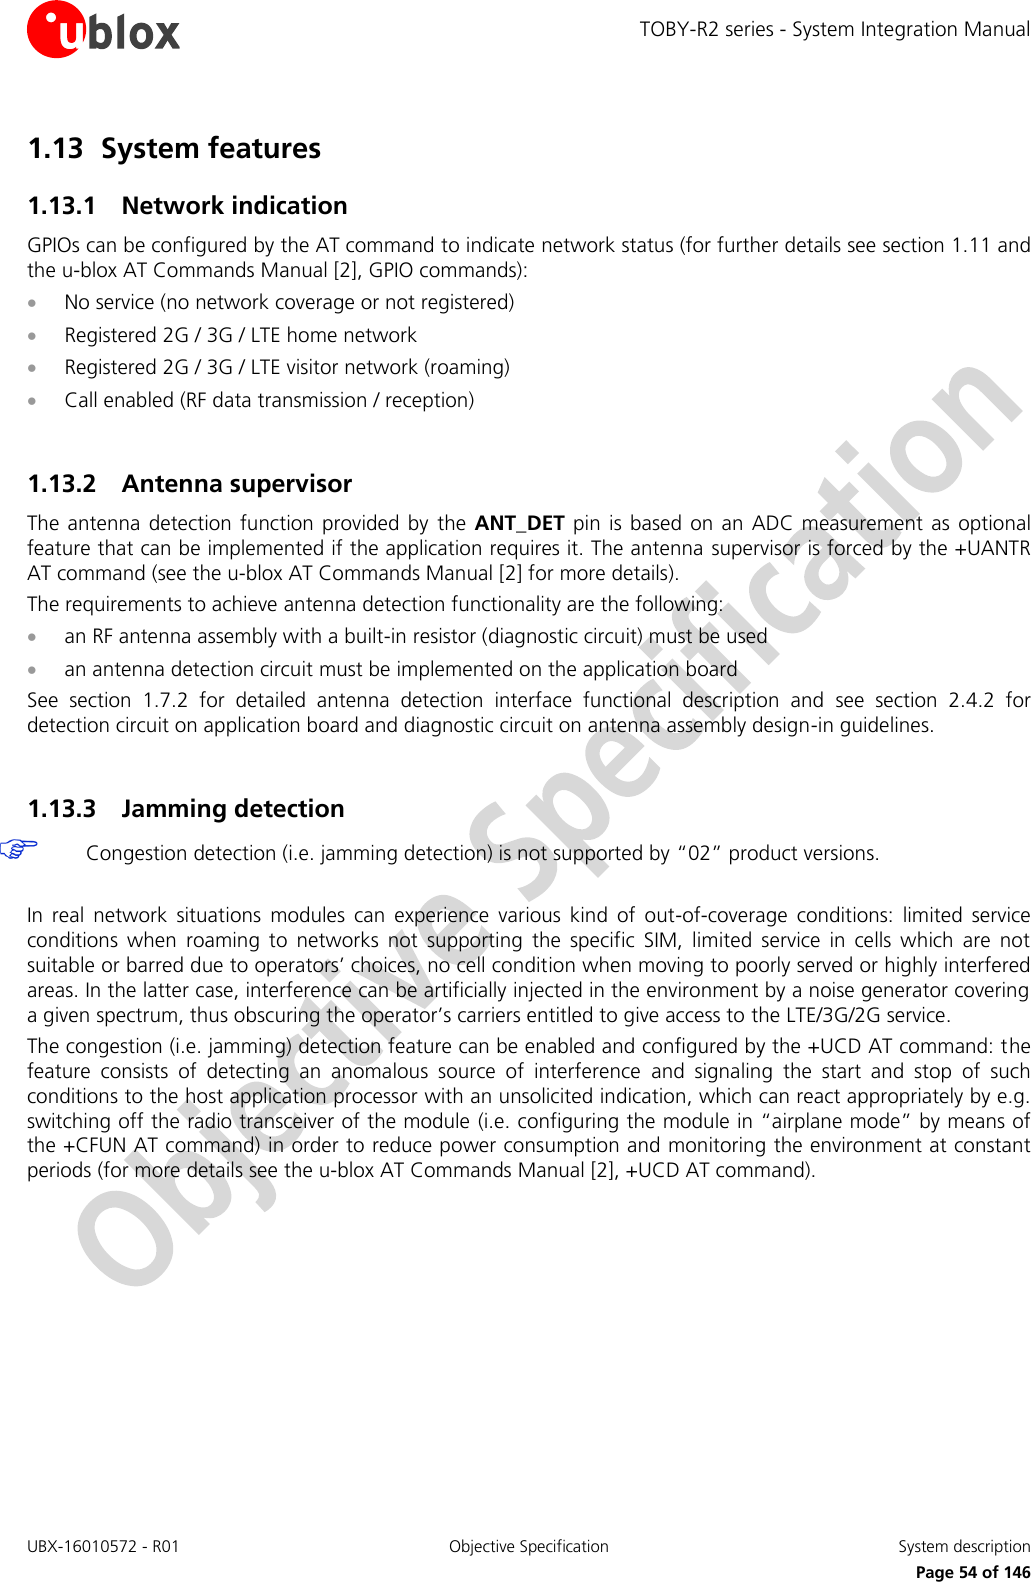 TOBY-R2 series - System Integration Manual UBX-16010572 - R01  Objective Specification  System description     Page 54 of 146 1.13 System features 1.13.1 Network indication GPIOs can be configured by the AT command to indicate network status (for further details see section 1.11 and the u-blox AT Commands Manual [2], GPIO commands):  No service (no network coverage or not registered)  Registered 2G / 3G / LTE home network  Registered 2G / 3G / LTE visitor network (roaming)  Call enabled (RF data transmission / reception)  1.13.2 Antenna supervisor The  antenna  detection  function  provided by  the ANT_DET  pin  is based  on  an ADC measurement  as  optional feature that can be implemented if the application requires it. The antenna  supervisor is forced by the +UANTR AT command (see the u-blox AT Commands Manual [2] for more details). The requirements to achieve antenna detection functionality are the following:  an RF antenna assembly with a built-in resistor (diagnostic circuit) must be used  an antenna detection circuit must be implemented on the application board See  section  1.7.2  for  detailed  antenna  detection  interface  functional  description  and  see  section  2.4.2  for detection circuit on application board and diagnostic circuit on antenna assembly design-in guidelines.  1.13.3 Jamming detection  Congestion detection (i.e. jamming detection) is not supported by “02” product versions.  In  real  network  situations  modules  can  experience  various  kind  of  out-of-coverage  conditions:  limited  service conditions  when  roaming  to  networks  not  supporting  the  specific  SIM,  limited  service  in  cells  which  are  not suitable or barred due to operators’ choices, no cell condition when moving to poorly served or highly interfered areas. In the latter case, interference can be artificially injected in the environment by a noise generator covering a given spectrum, thus obscuring the operator’s carriers entitled to give access to the LTE/3G/2G service. The congestion (i.e. jamming) detection feature can be enabled and configured by the +UCD AT command: the feature  consists  of  detecting  an  anomalous  source  of  interference  and  signaling  the  start  and  stop  of  such conditions to the host application processor with an unsolicited indication, which can react appropriately by e.g. switching off the radio transceiver of the module (i.e. configuring the module in “airplane mode” by means of the +CFUN AT command) in order to reduce power consumption and monitoring the environment at constant periods (for more details see the u-blox AT Commands Manual [2], +UCD AT command).  